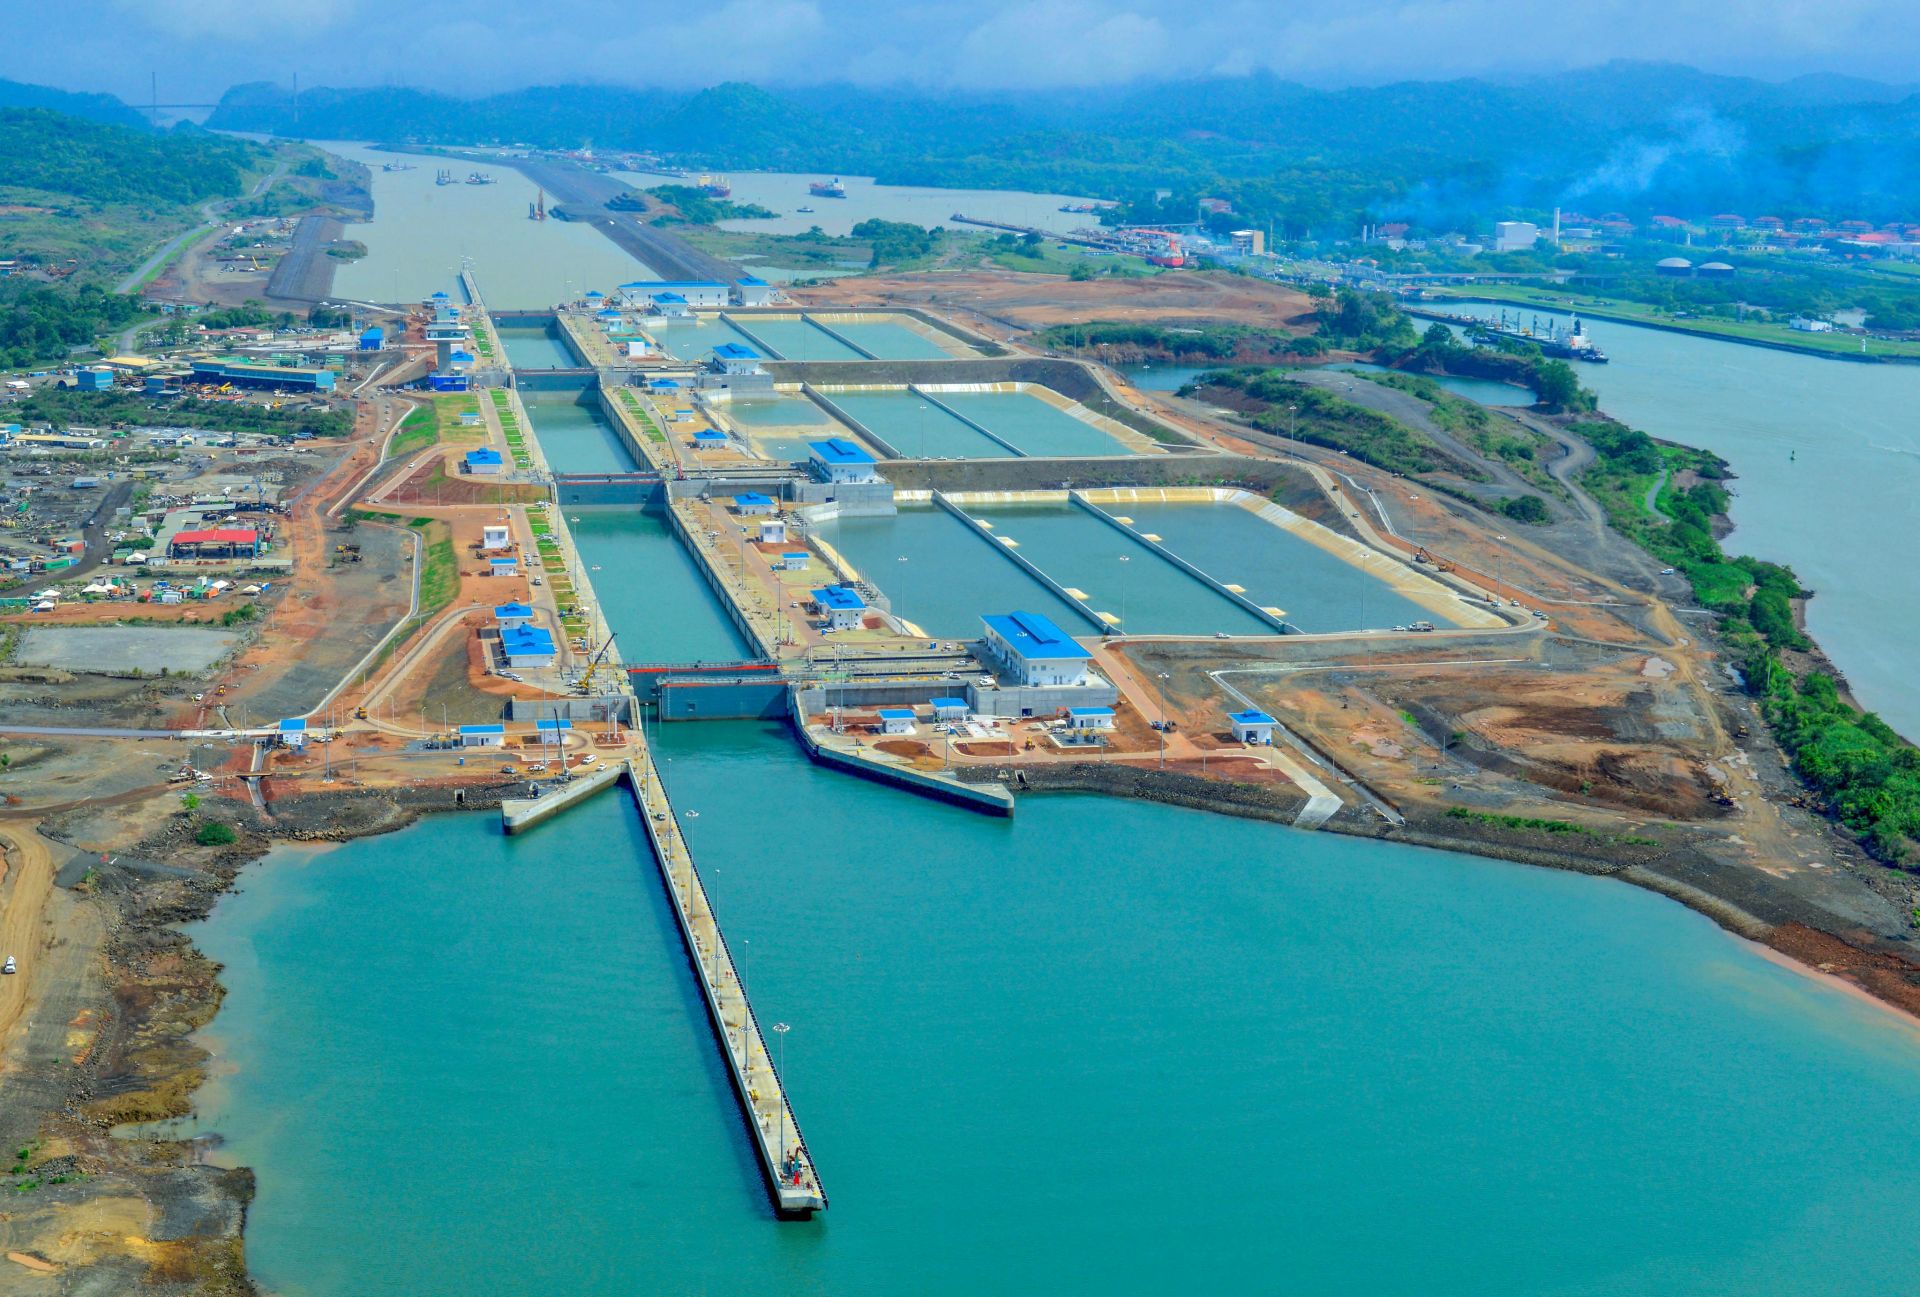 epa05392588 A handout picture realeased by the Panama Canal Authority (PCA) shows an aerial view of new Agua Clara locks in the expanded Panama Canal in Panama, 26 June 2016. The Neopanamax cargo ship Cusco Shipping Panama's passage inaugurated the Panama Canal expansion.  EPA/PANAMA CANAL AUTHORITY / HANDOUT EDITORIAL USE ONLY/NO SALES HANDOUT EDITORIAL USE ONLY/NO SALES